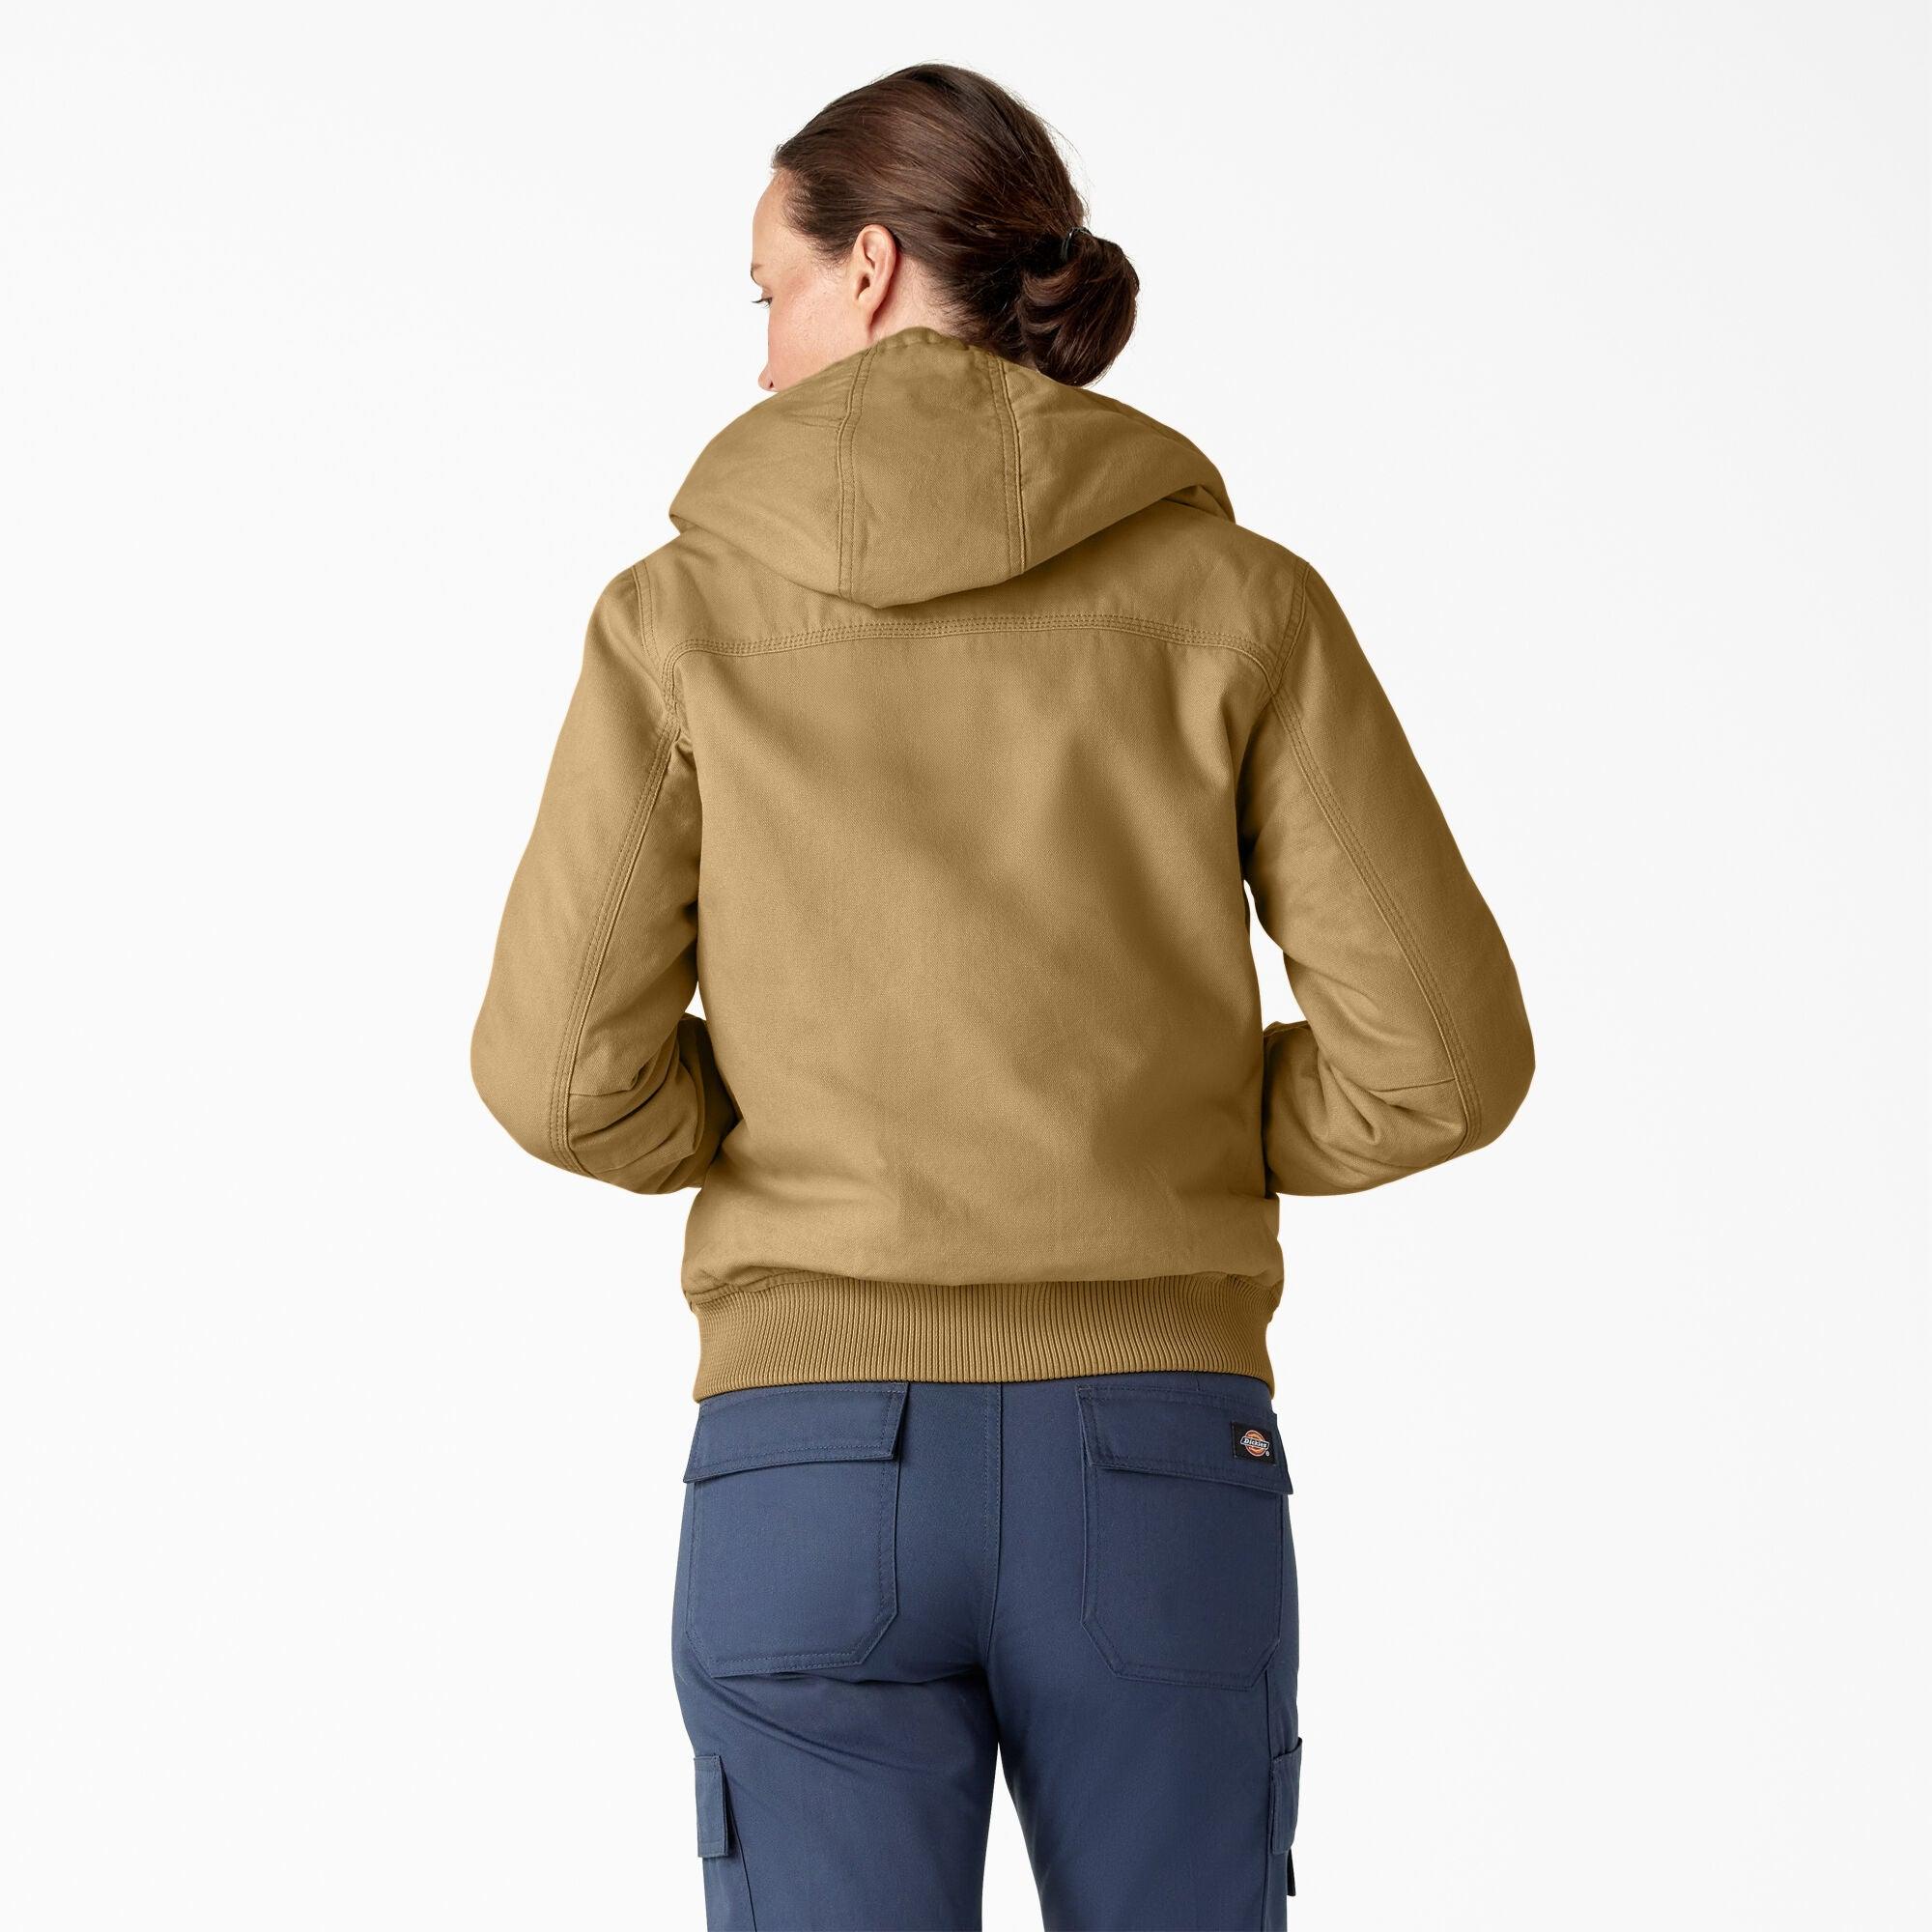 Women's Fleece Lined Duck Canvas Jacket - Rinsed Nubuck - Purpose-Built / Home of the Trades